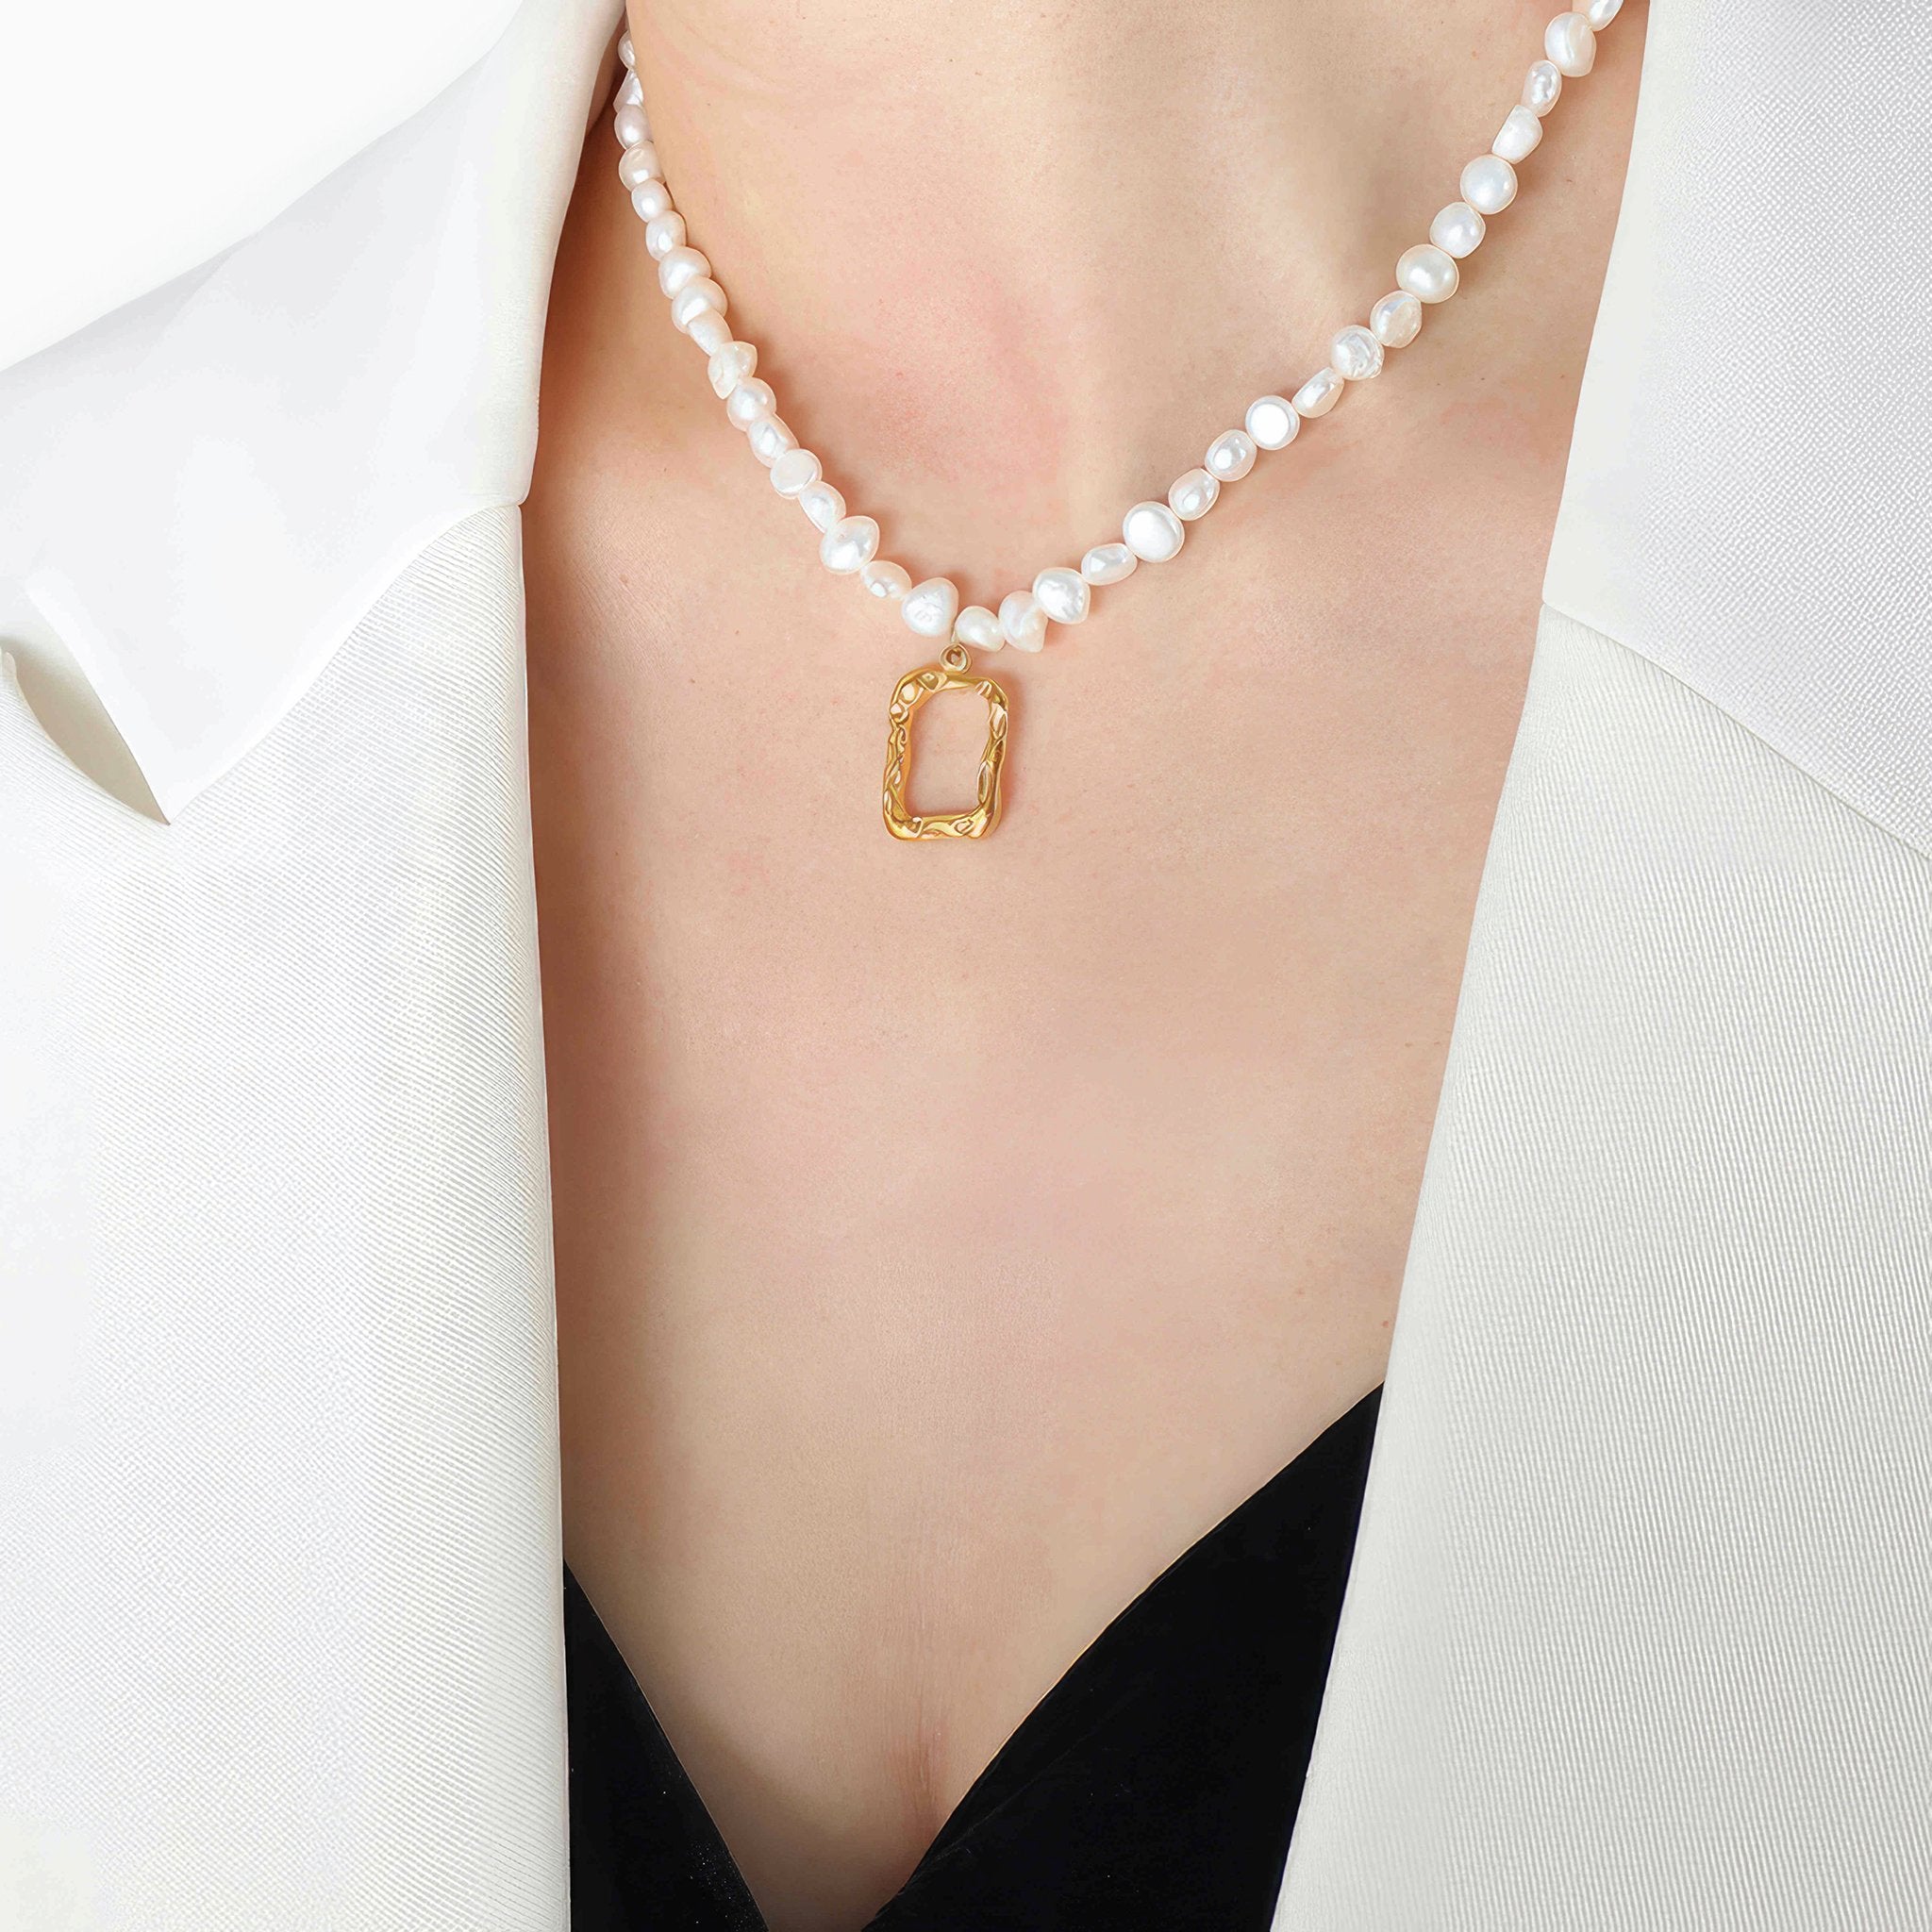 Pearl & 18K Gold Necklace with Square Embossed Design - Nobbier - Gold Necklace - 18K Gold And Titanium PVD Coated Jewelry